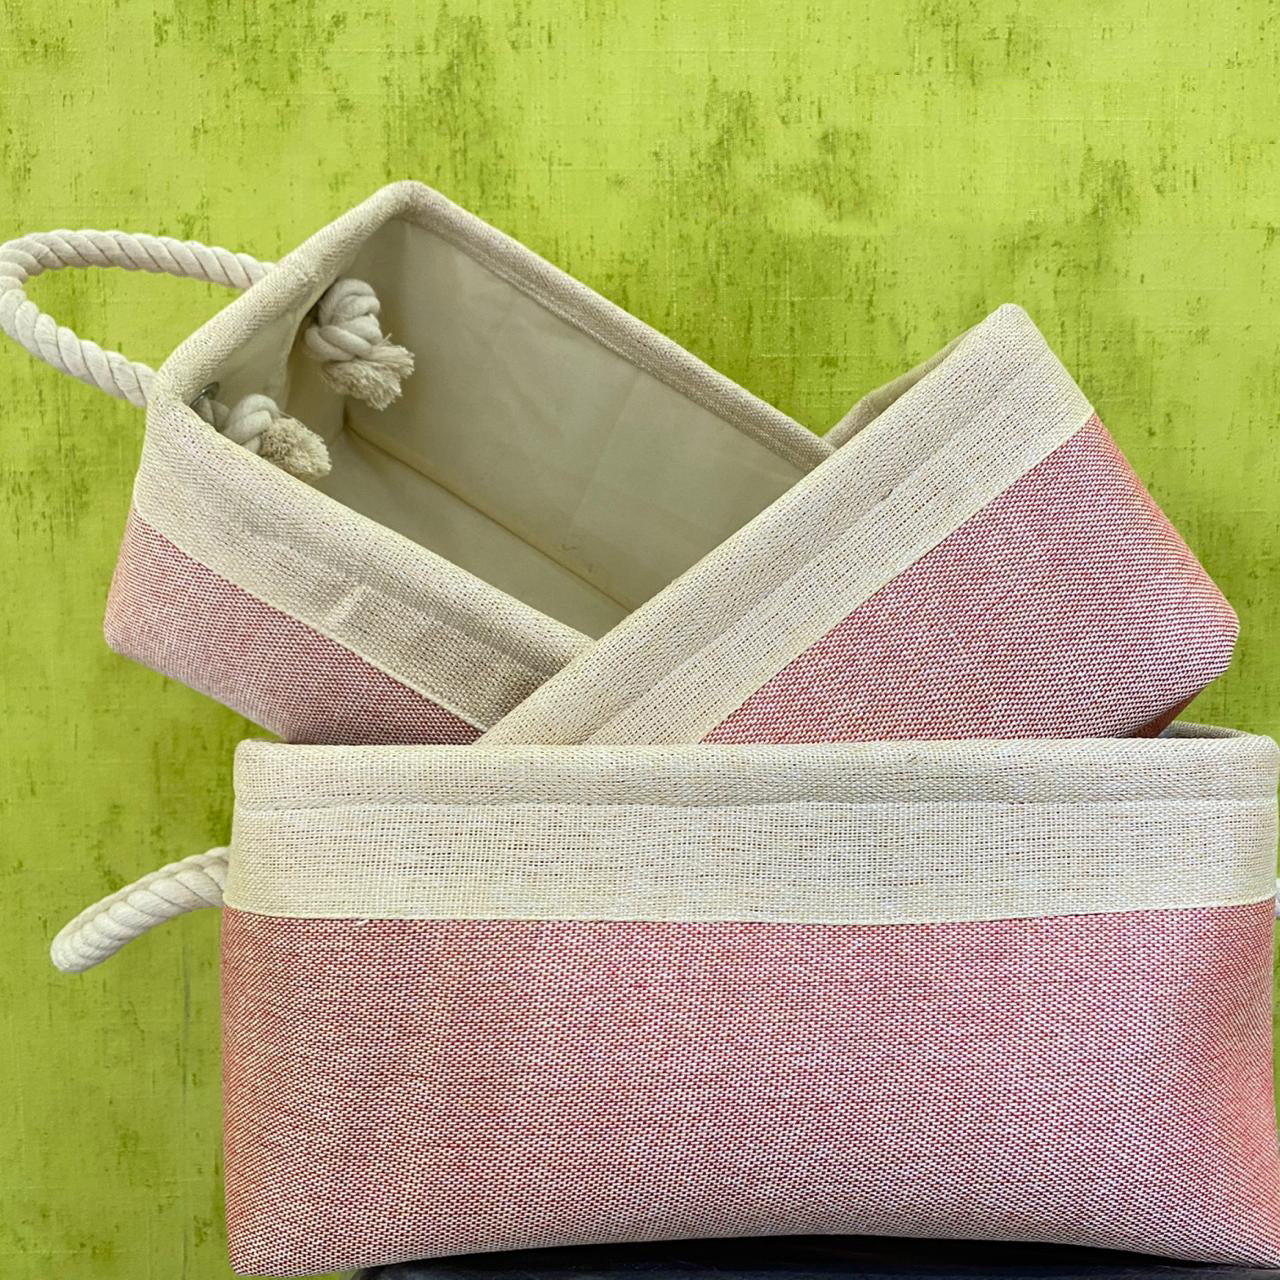 pink-beige-color-jute-storage-basket-with-drawstring-handle-in-three-sizes-rope-handle-to-store-purpose